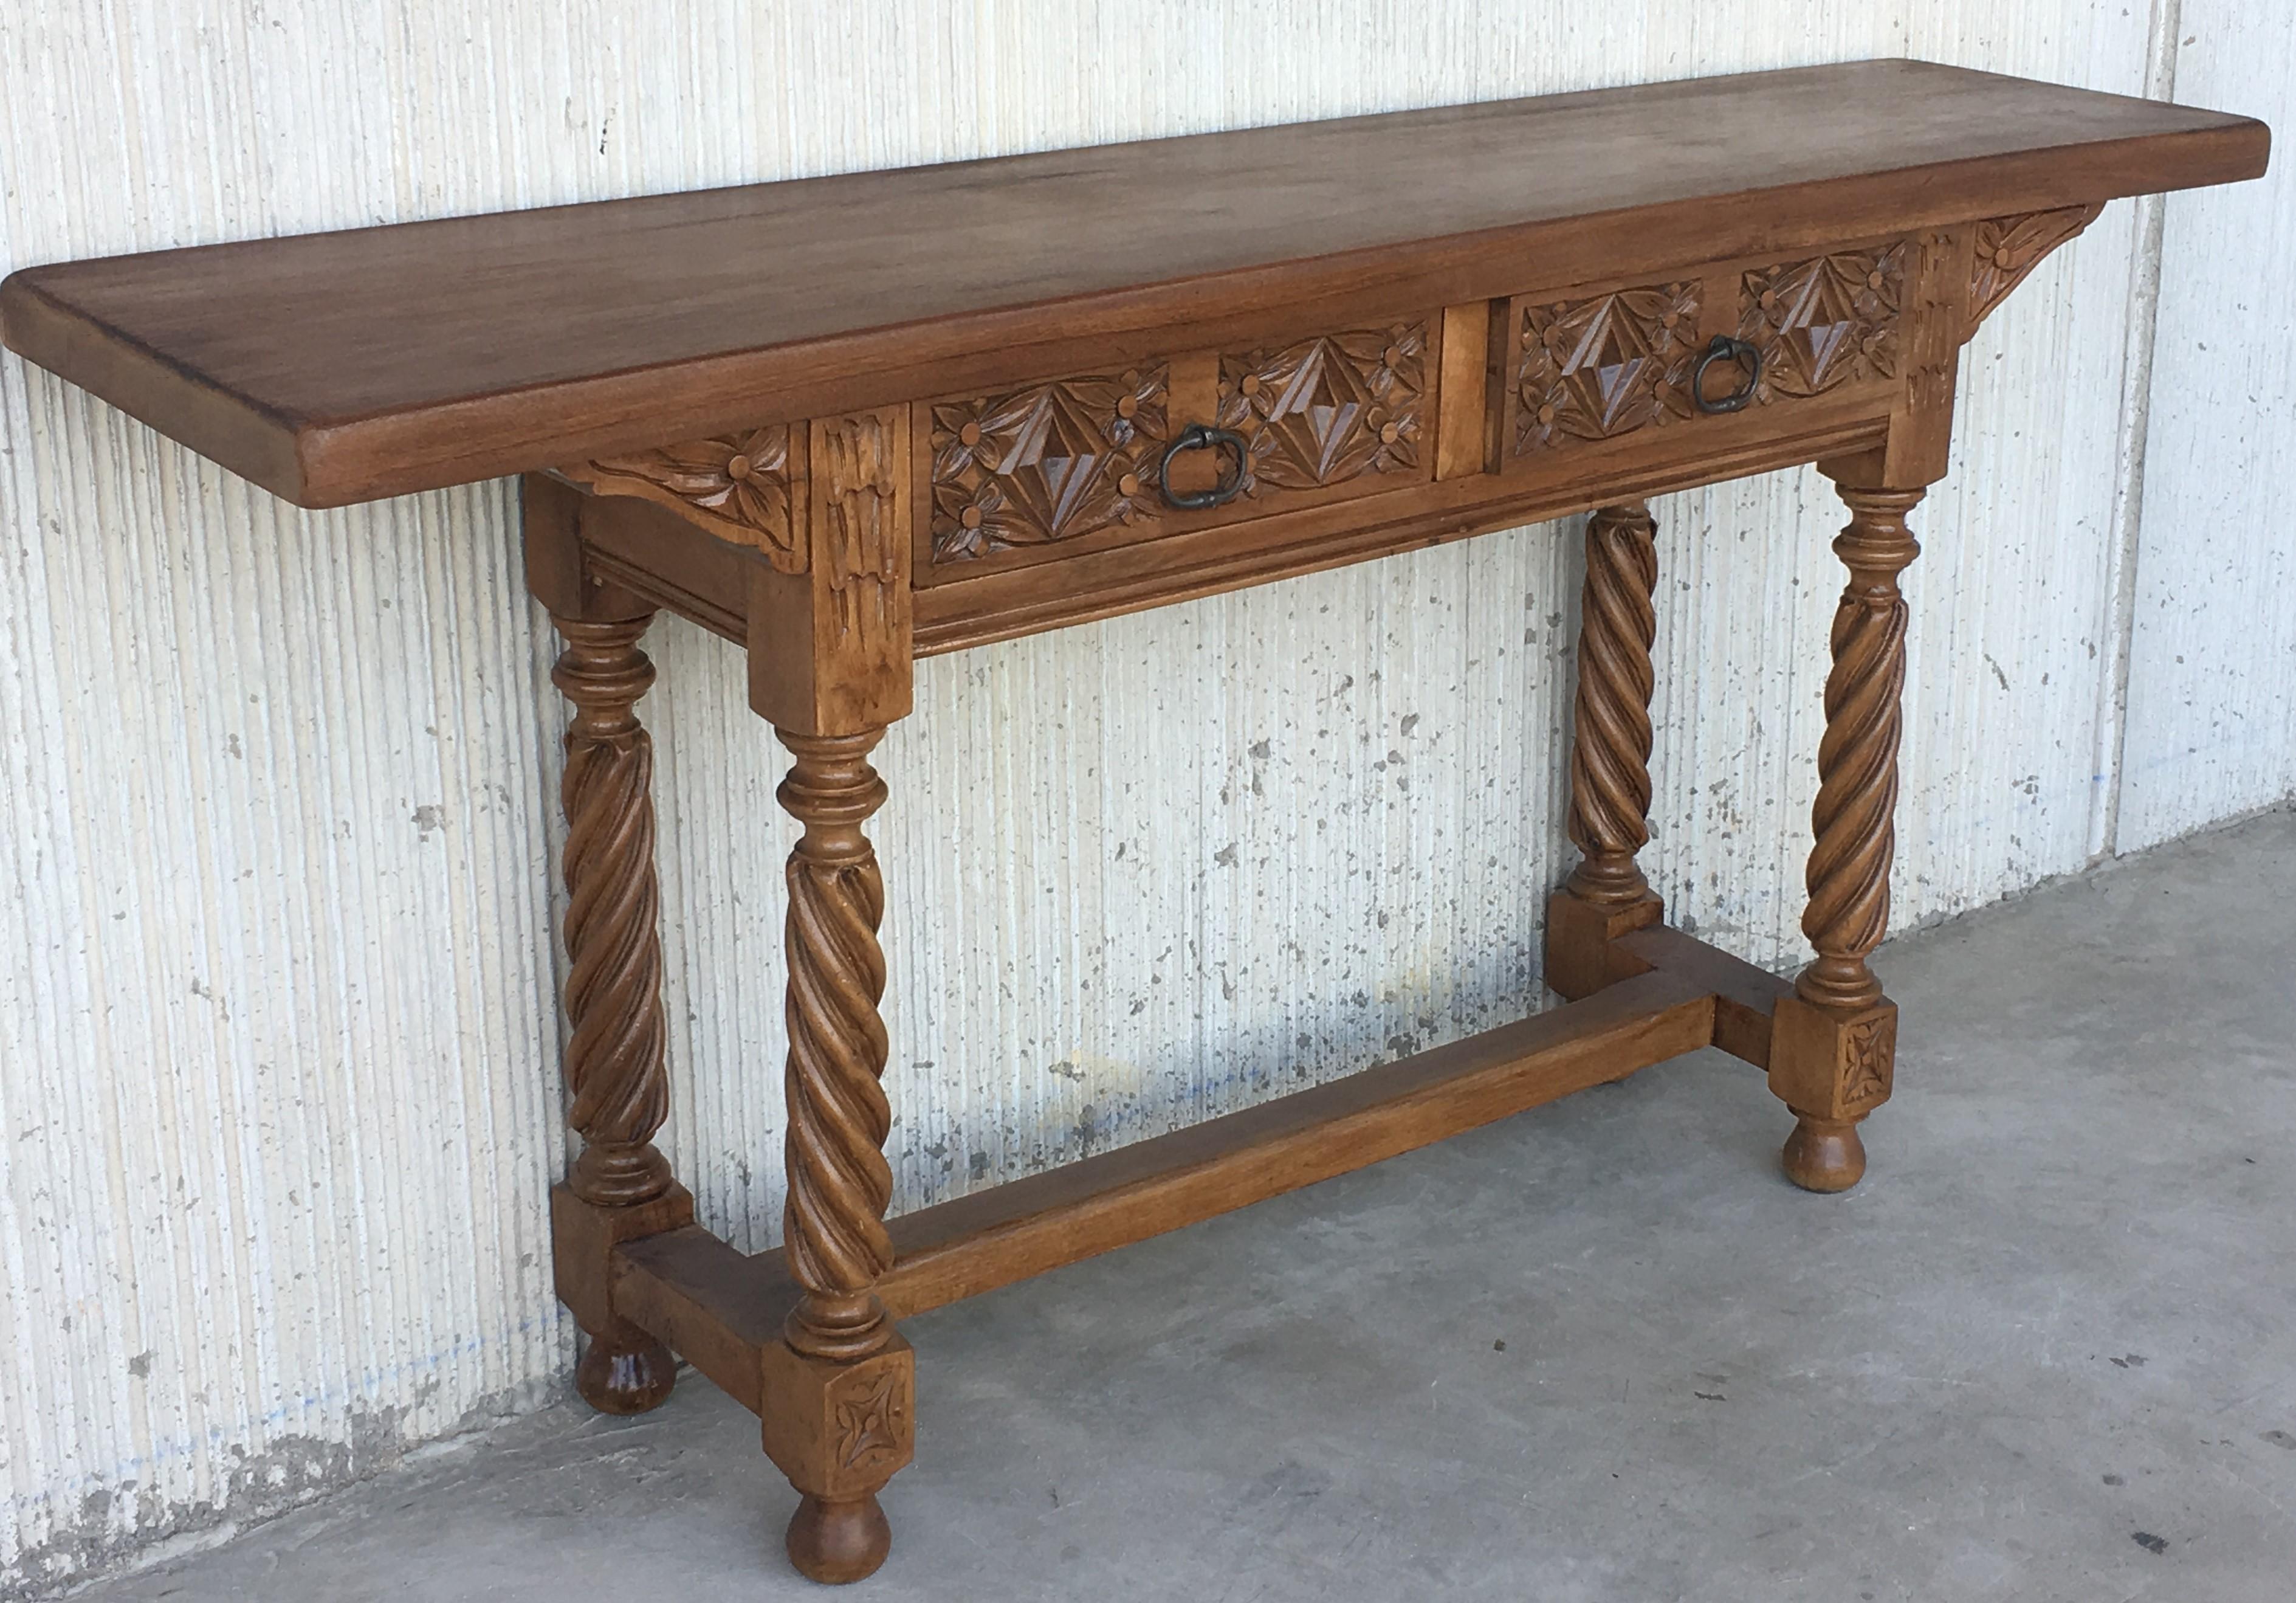 18th Century Spanish Catalan Carved Console Table with Two Drawers (Barock)